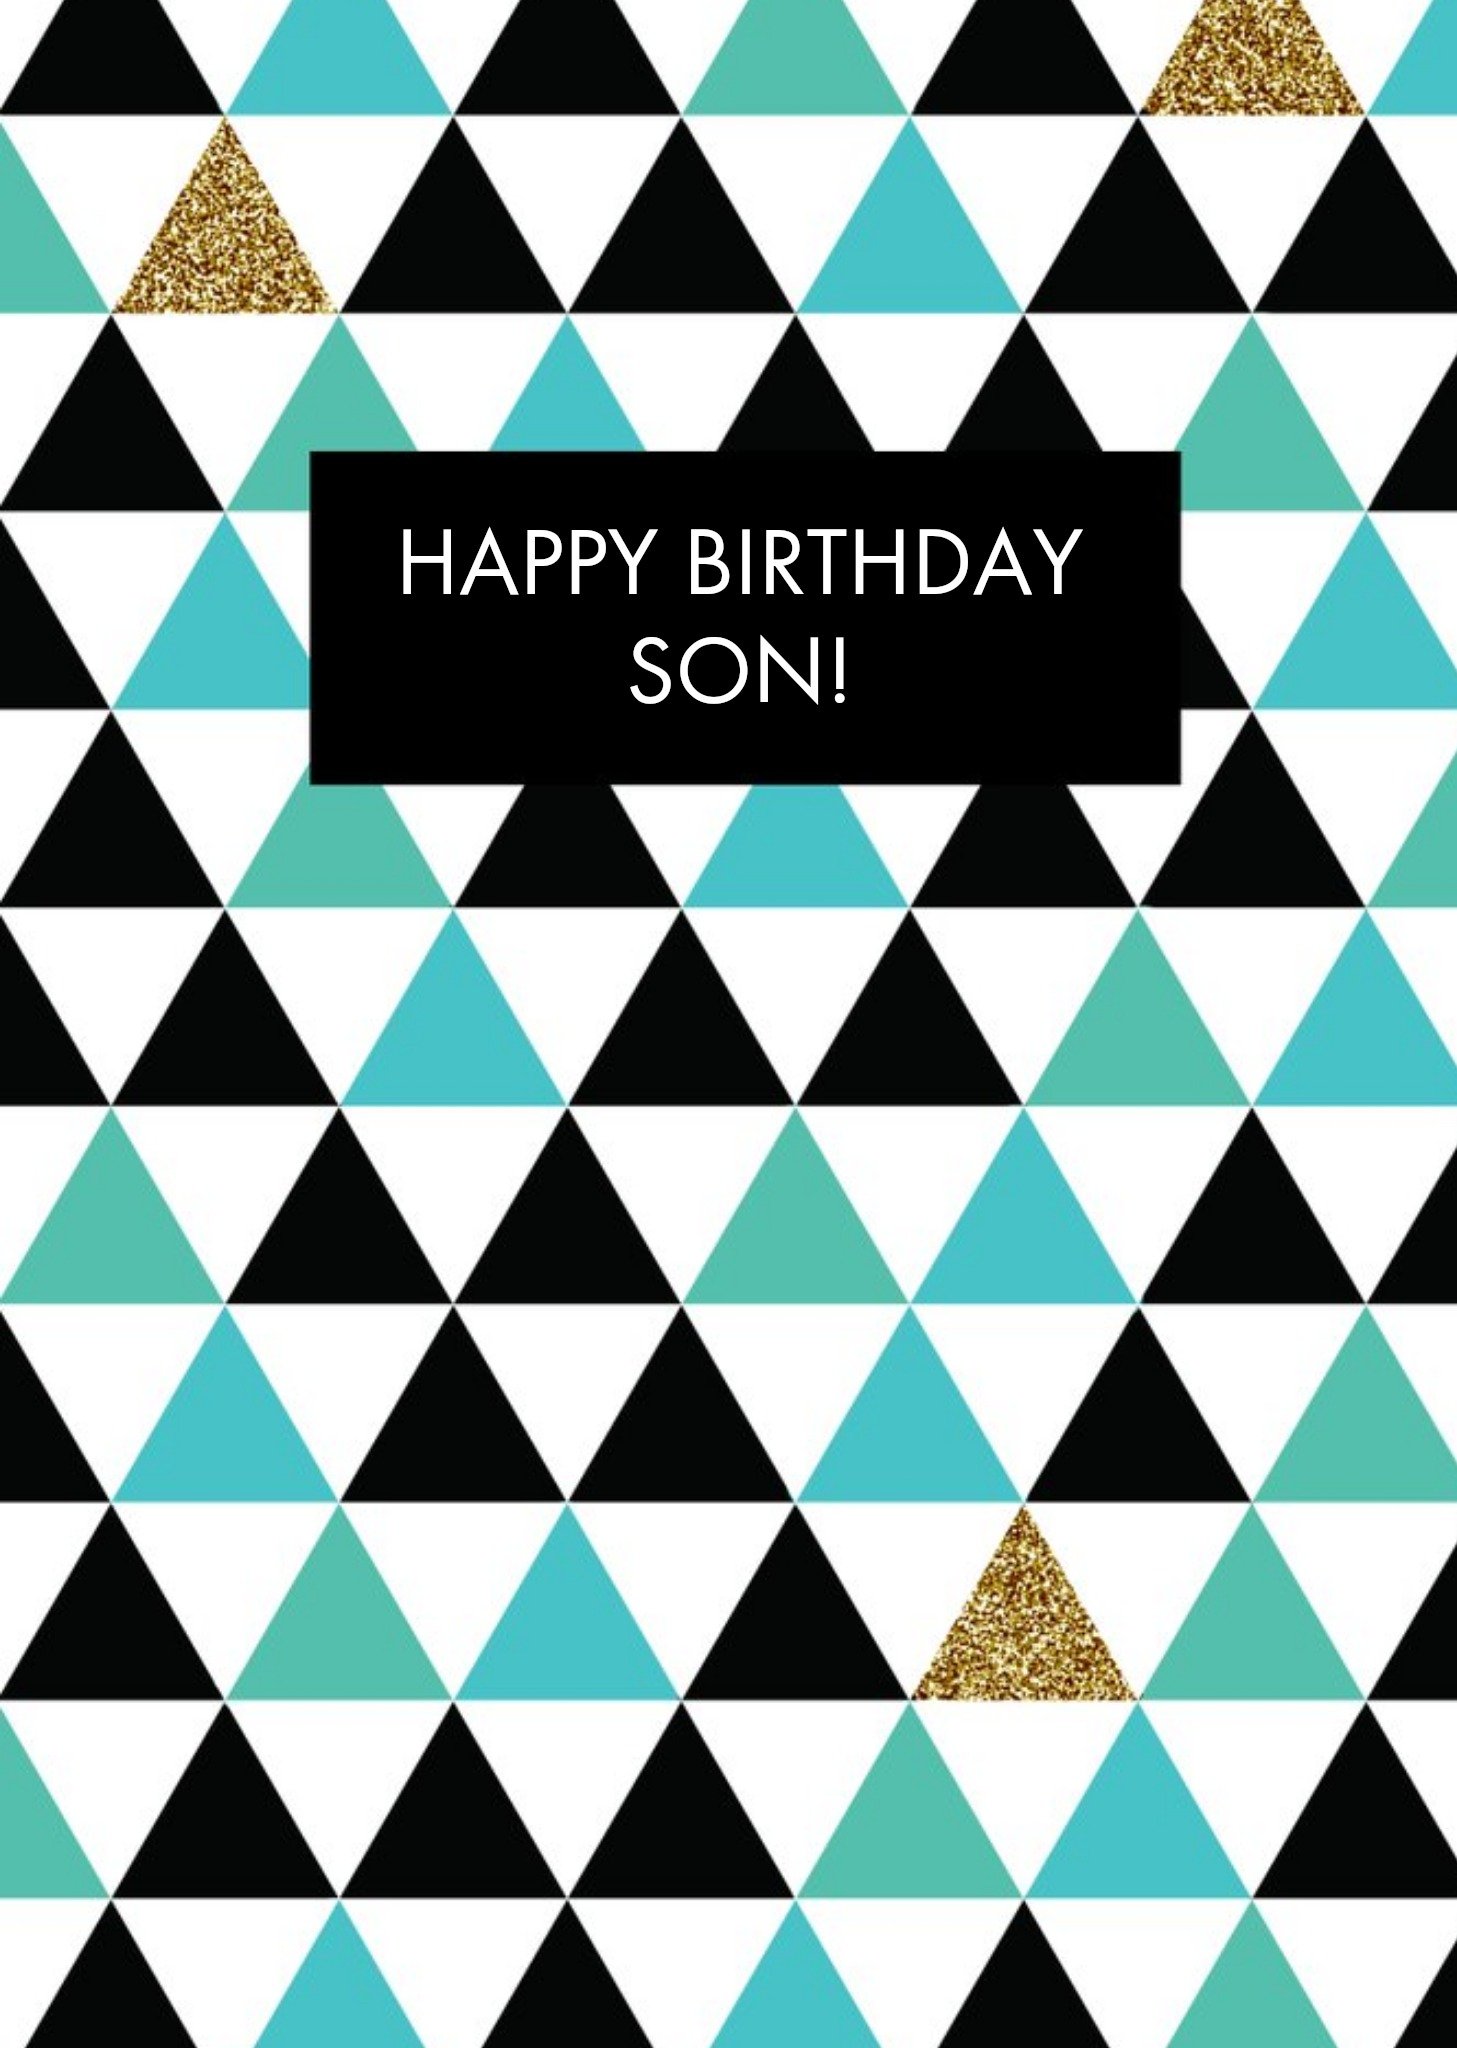 Moonpig Turquoise Geometric Shapes Personalised Happy Birthday Card For Son, Large